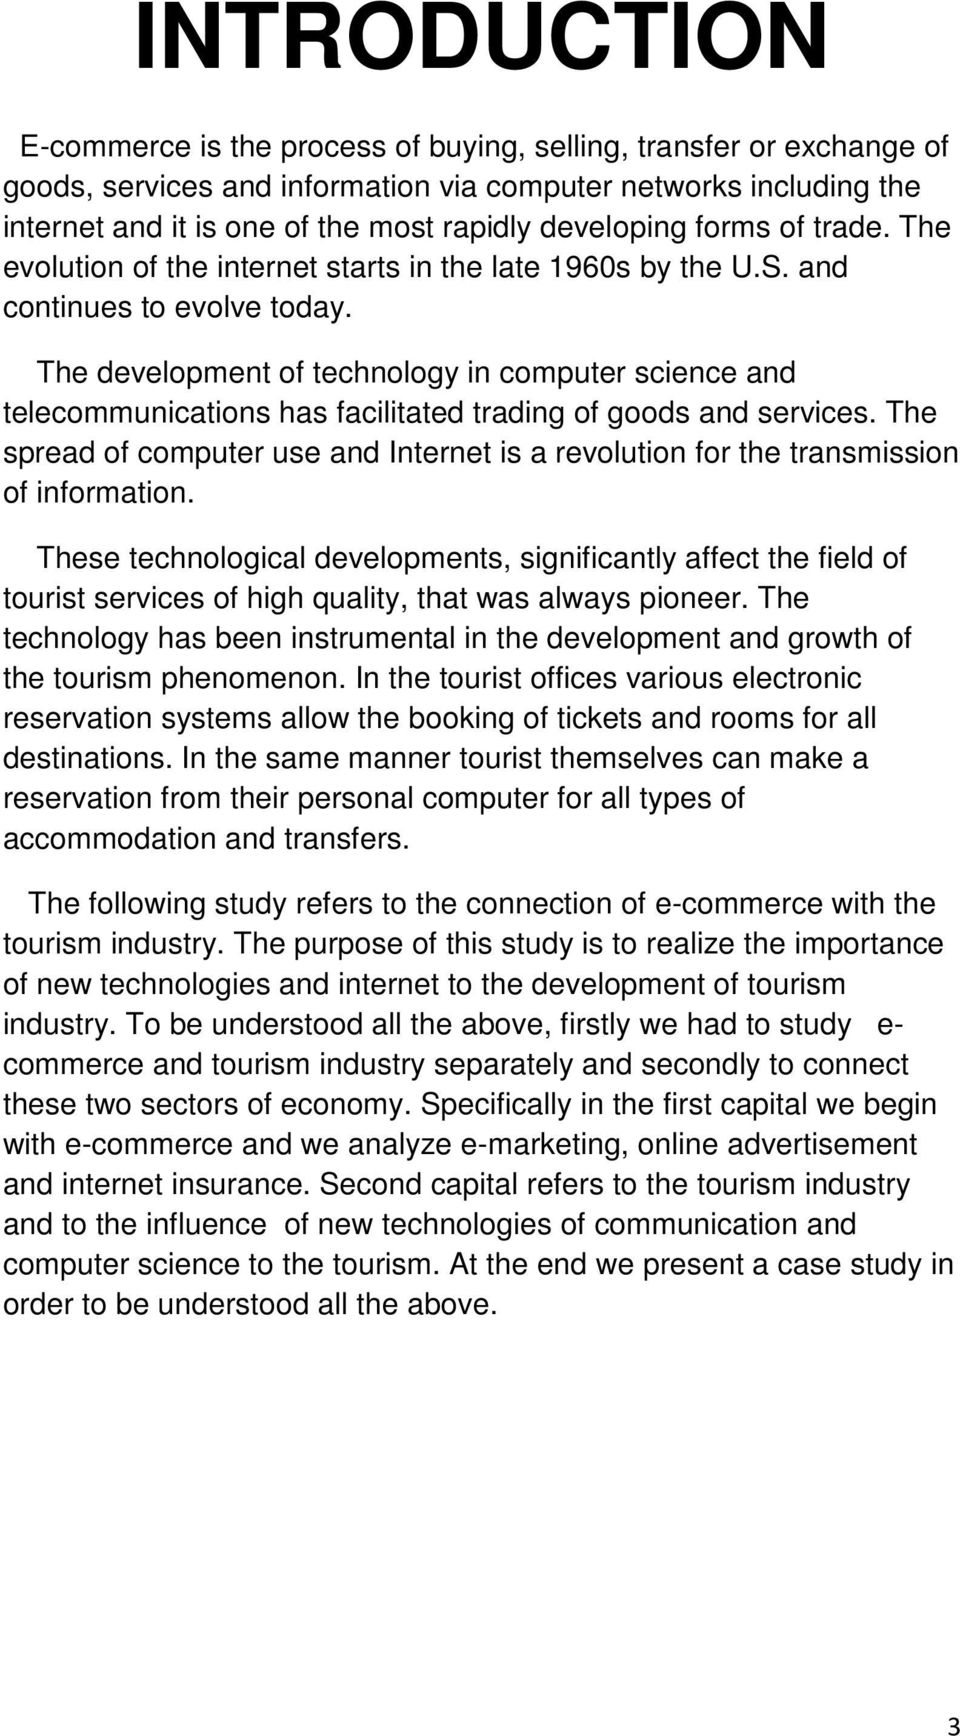 The development of technology in computer science and telecommunications has facilitated trading of goods and services.